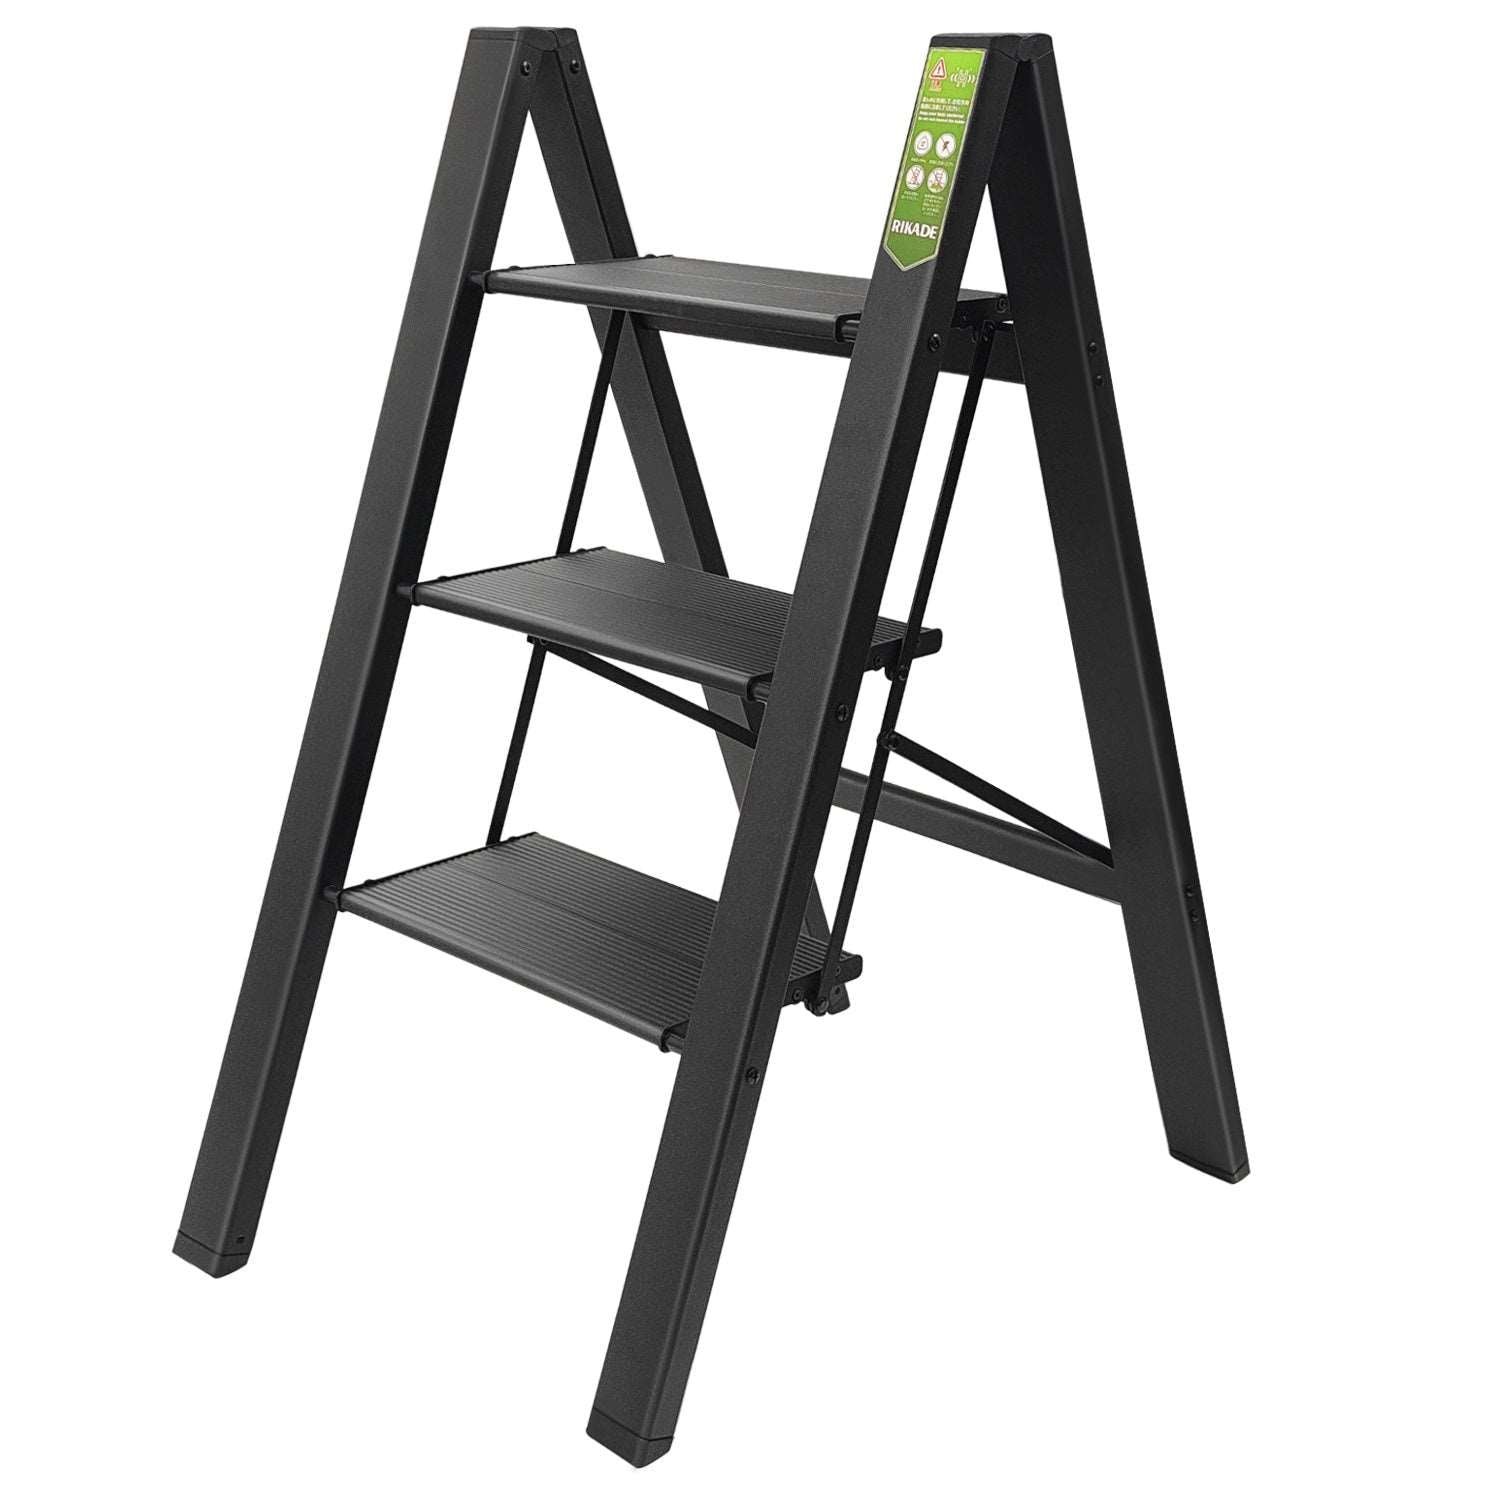 3 Step Ladder; Folding Step Stool with Wide Anti-Slip Pedal; Aluminum Portable Lightweight Ladder for Home and Office Use; Kitchen Step Stool 330lb Capacity